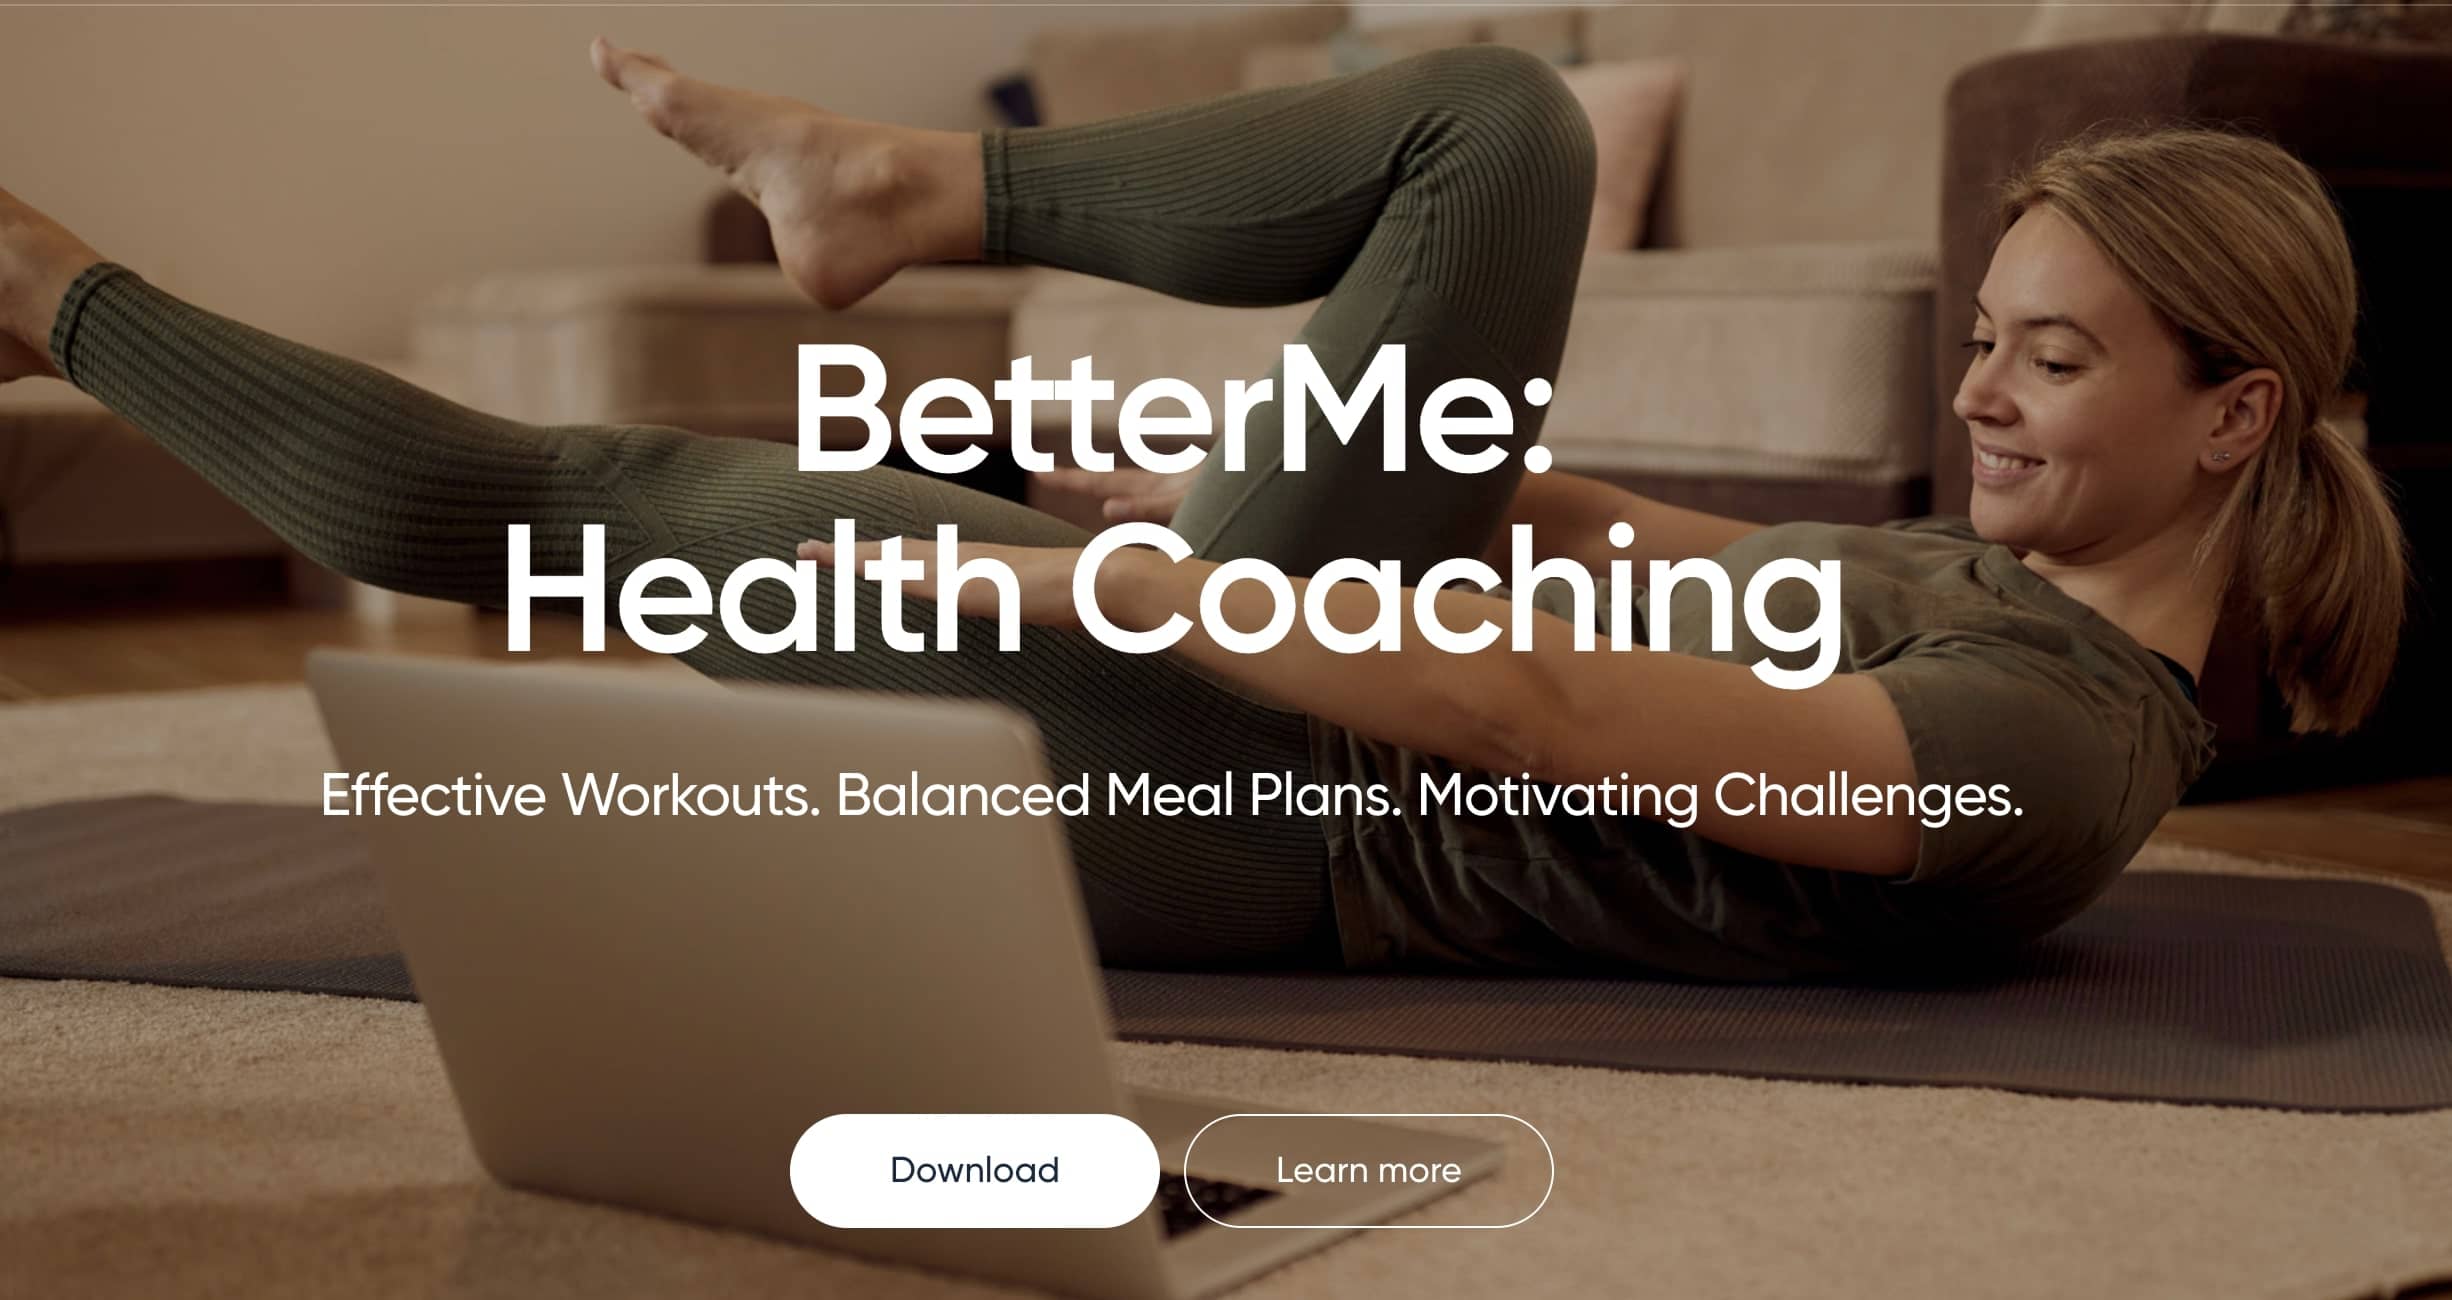 A woman exercises on a mat in front of a laptop, showcasing the latest from one of the top fitness tech companies. Text promotes BetterMe Health Coaching with options to download or learn more about effective 2024 workouts and balanced meal plans with cutting-edge fitness technology.